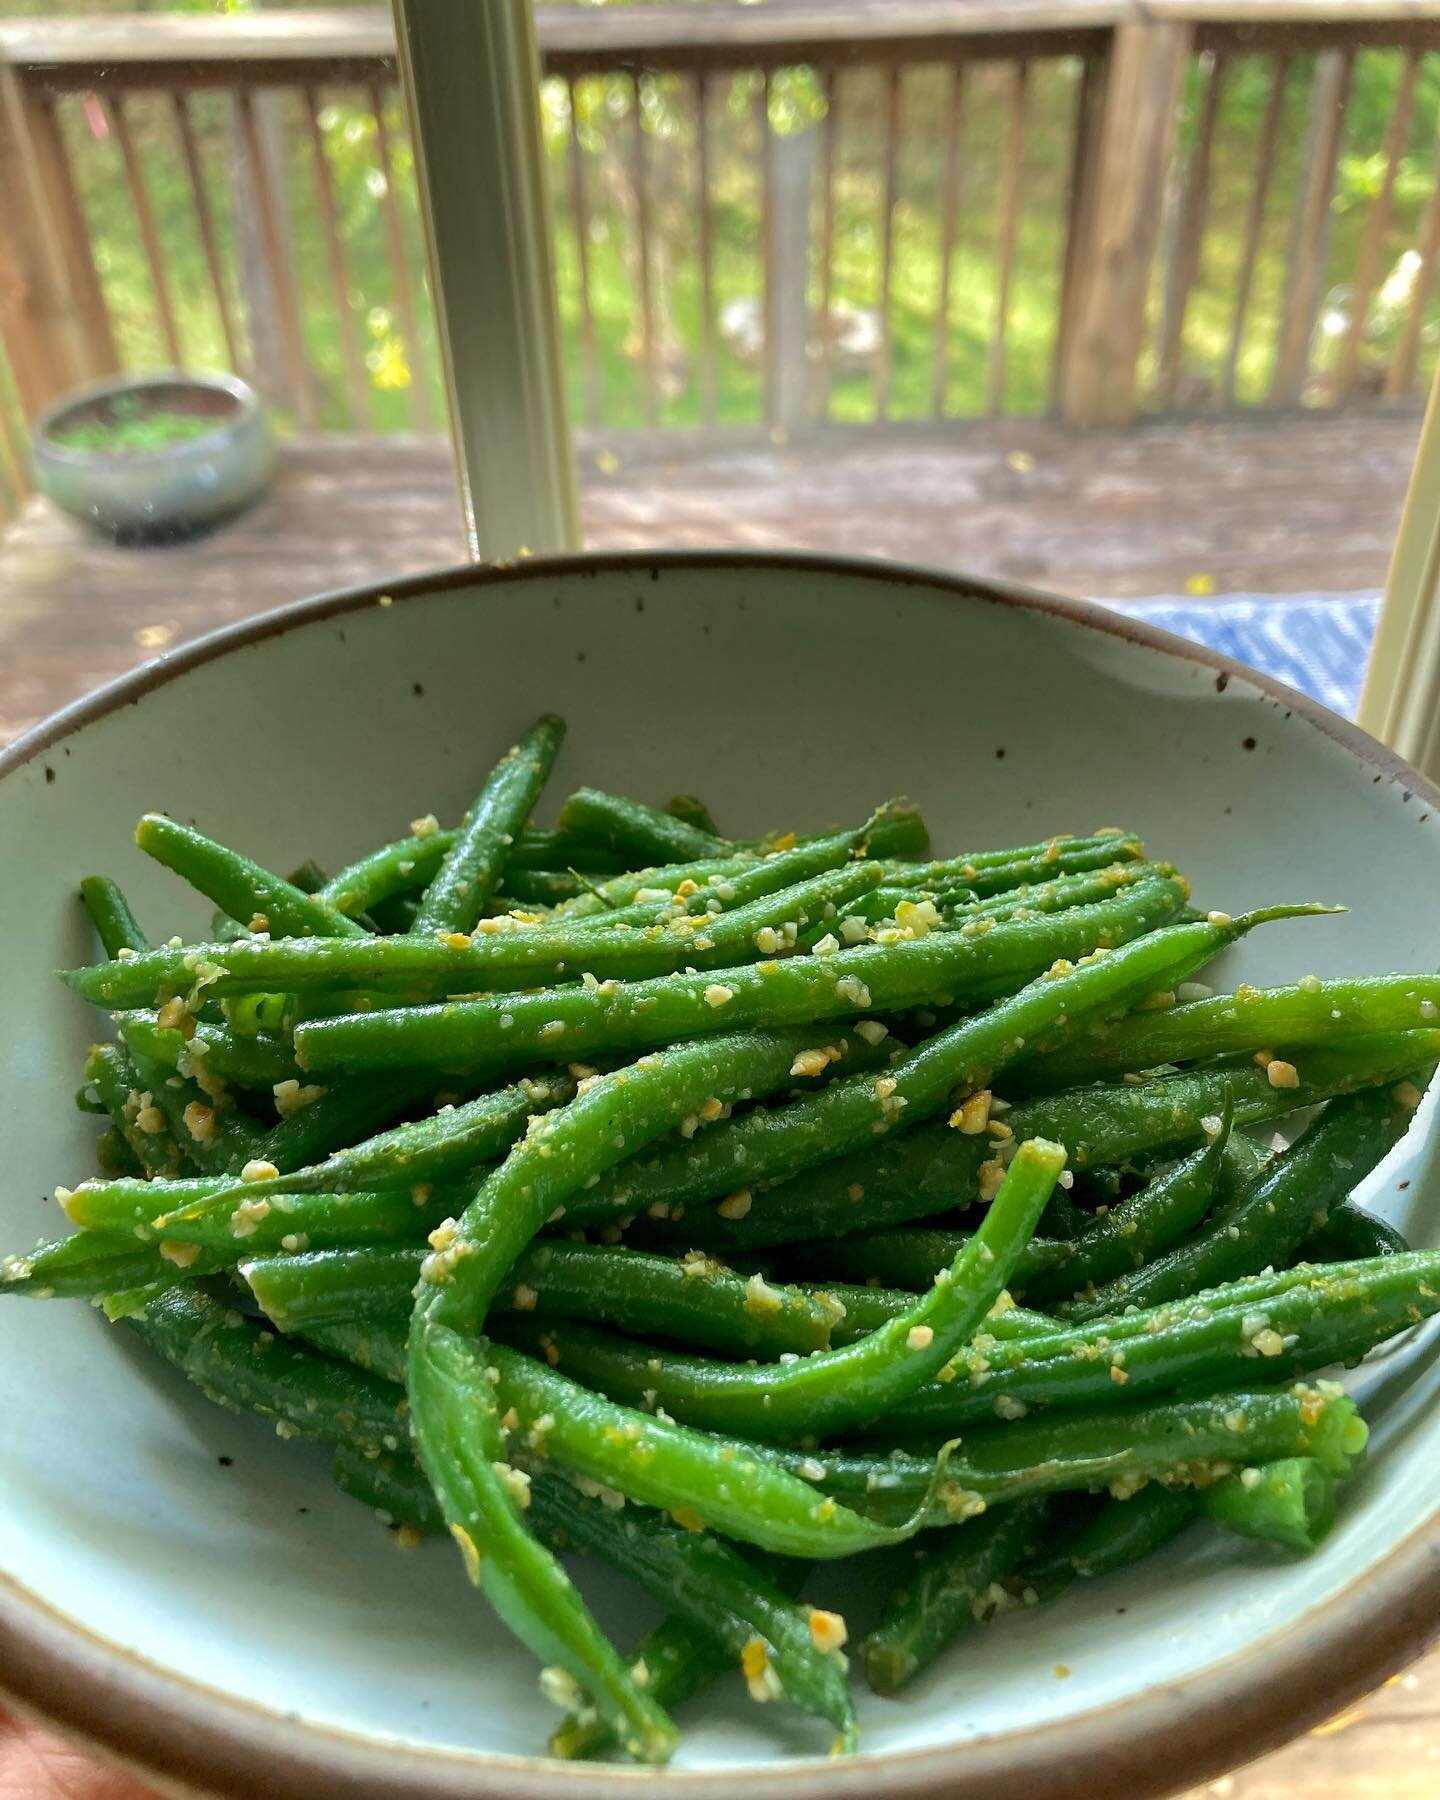 I always encourage clients to season their veggies well and make them delicious.  Tonight, I practiced what I preach.

As part of dinner, I planned on simply saut&eacute;ing green beans in garlic and lemon&hellip; but then I didn&rsquo;t stop there. 